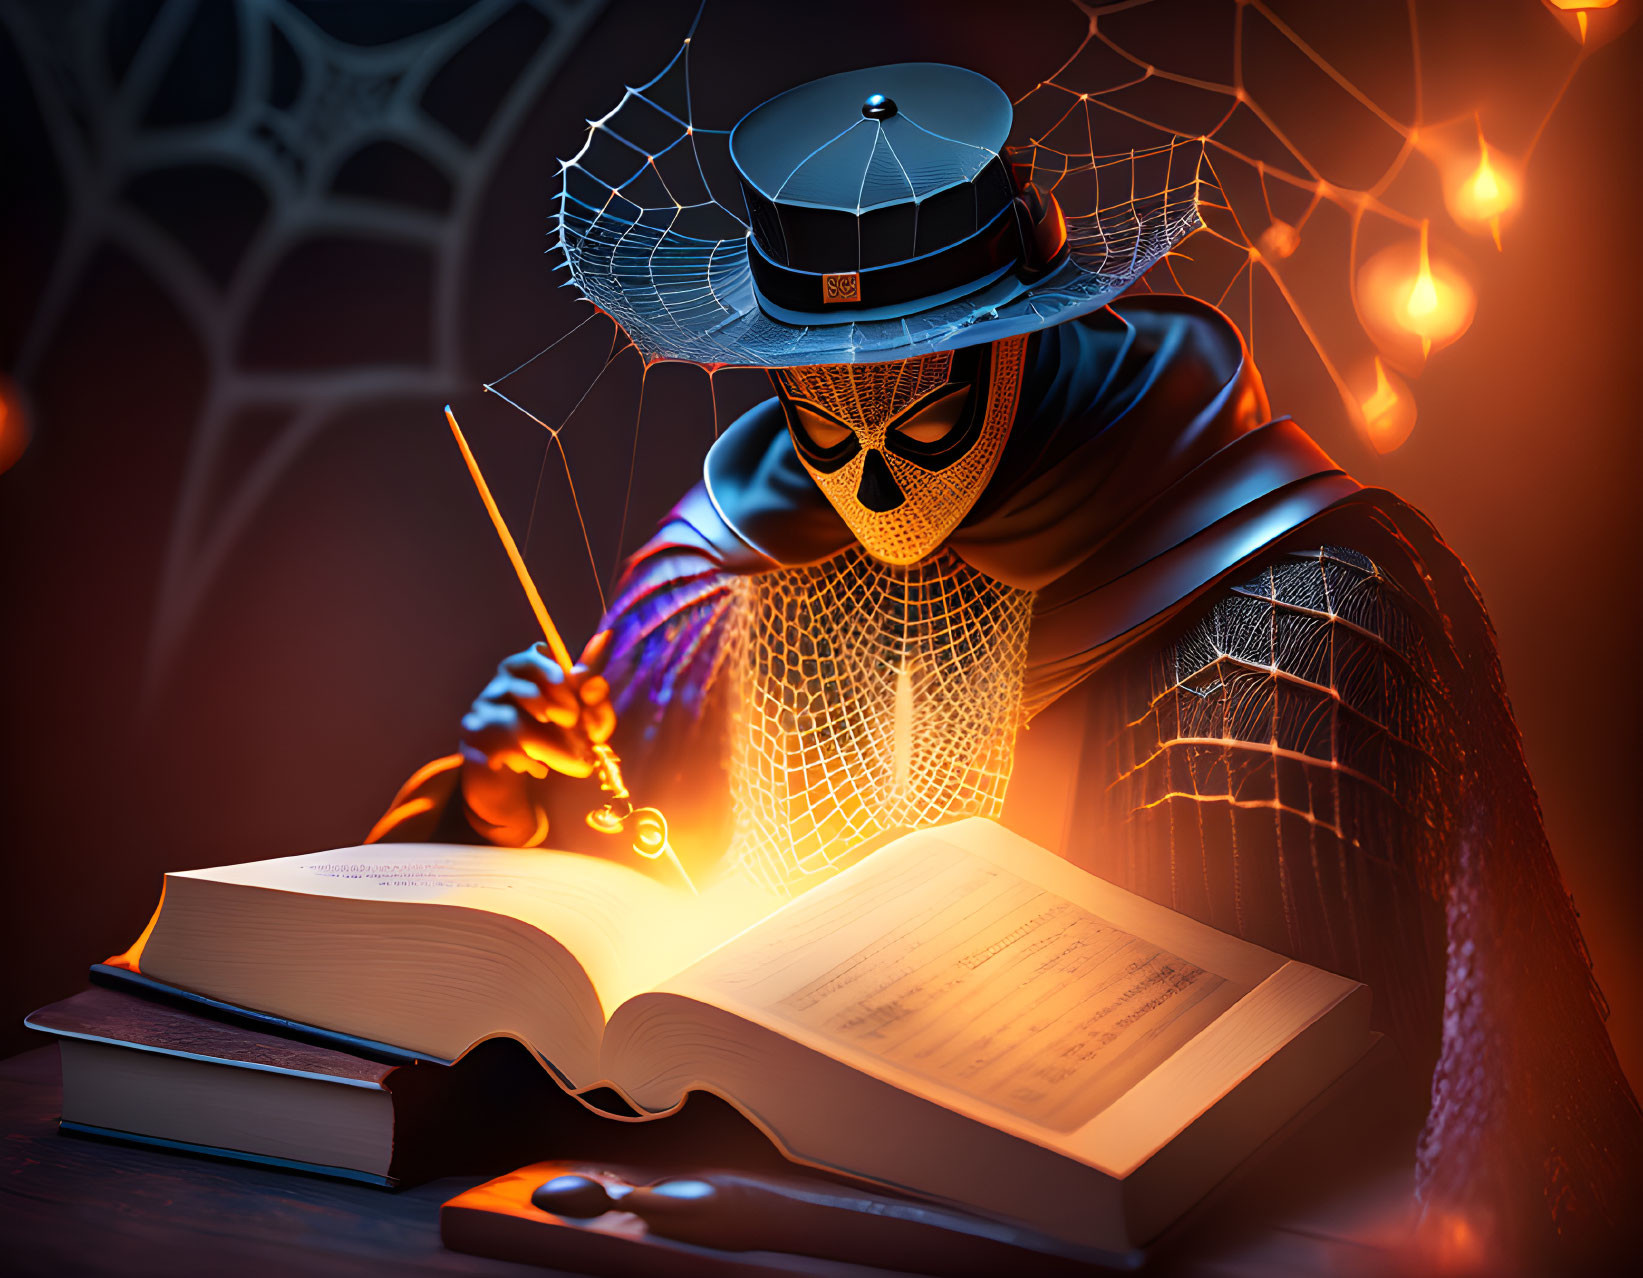 Skull-like masked figure reading a glowing book in warm setting